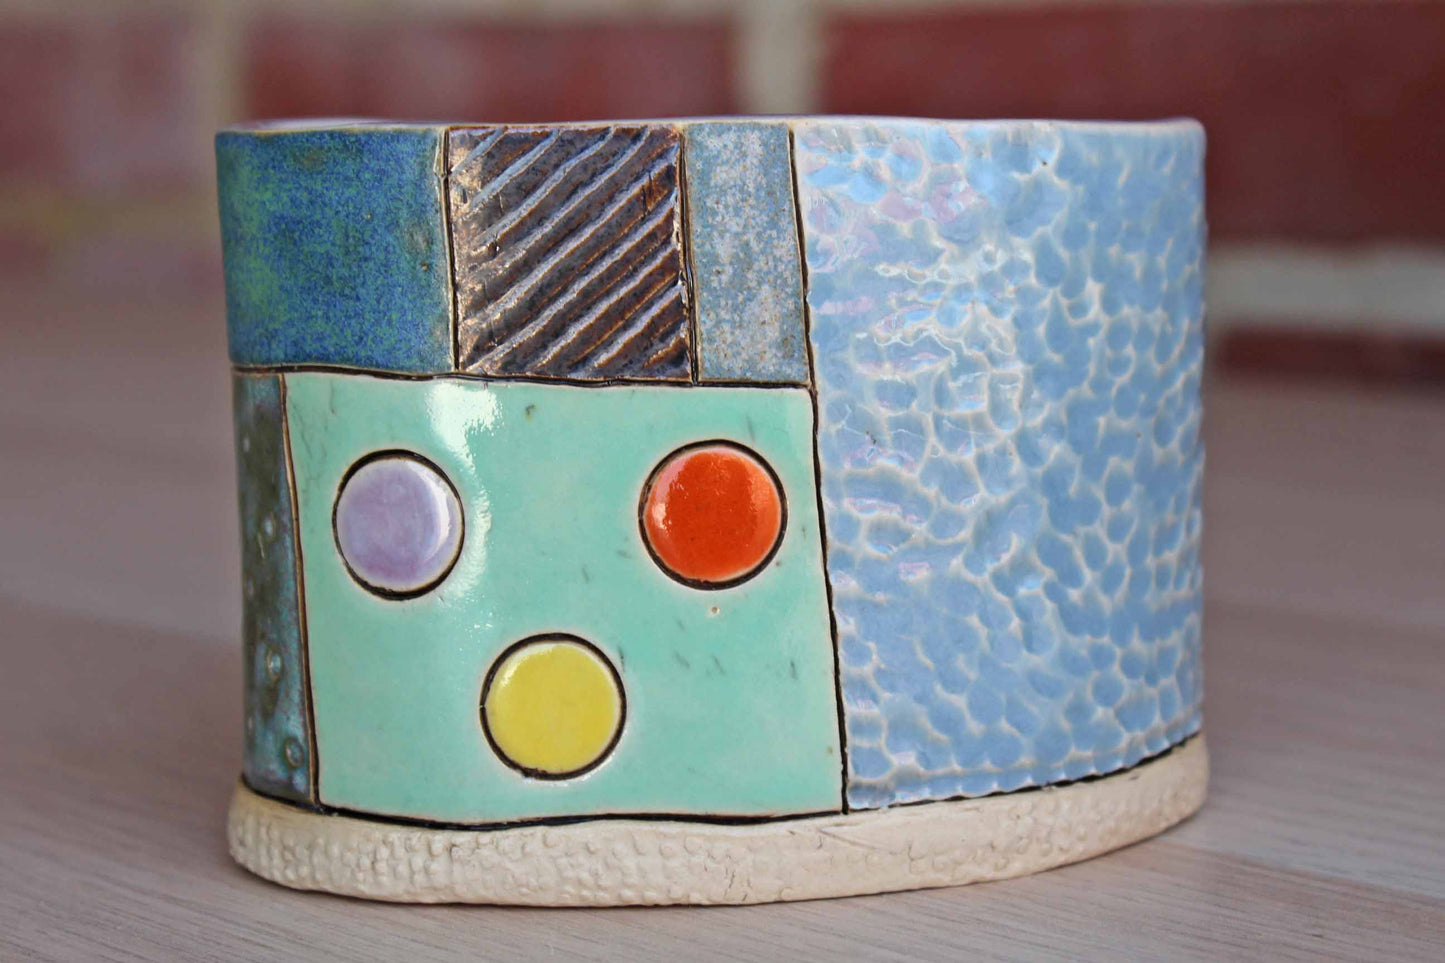 Small Ceramic Storage Container Decorated with House, Tree and Shapes